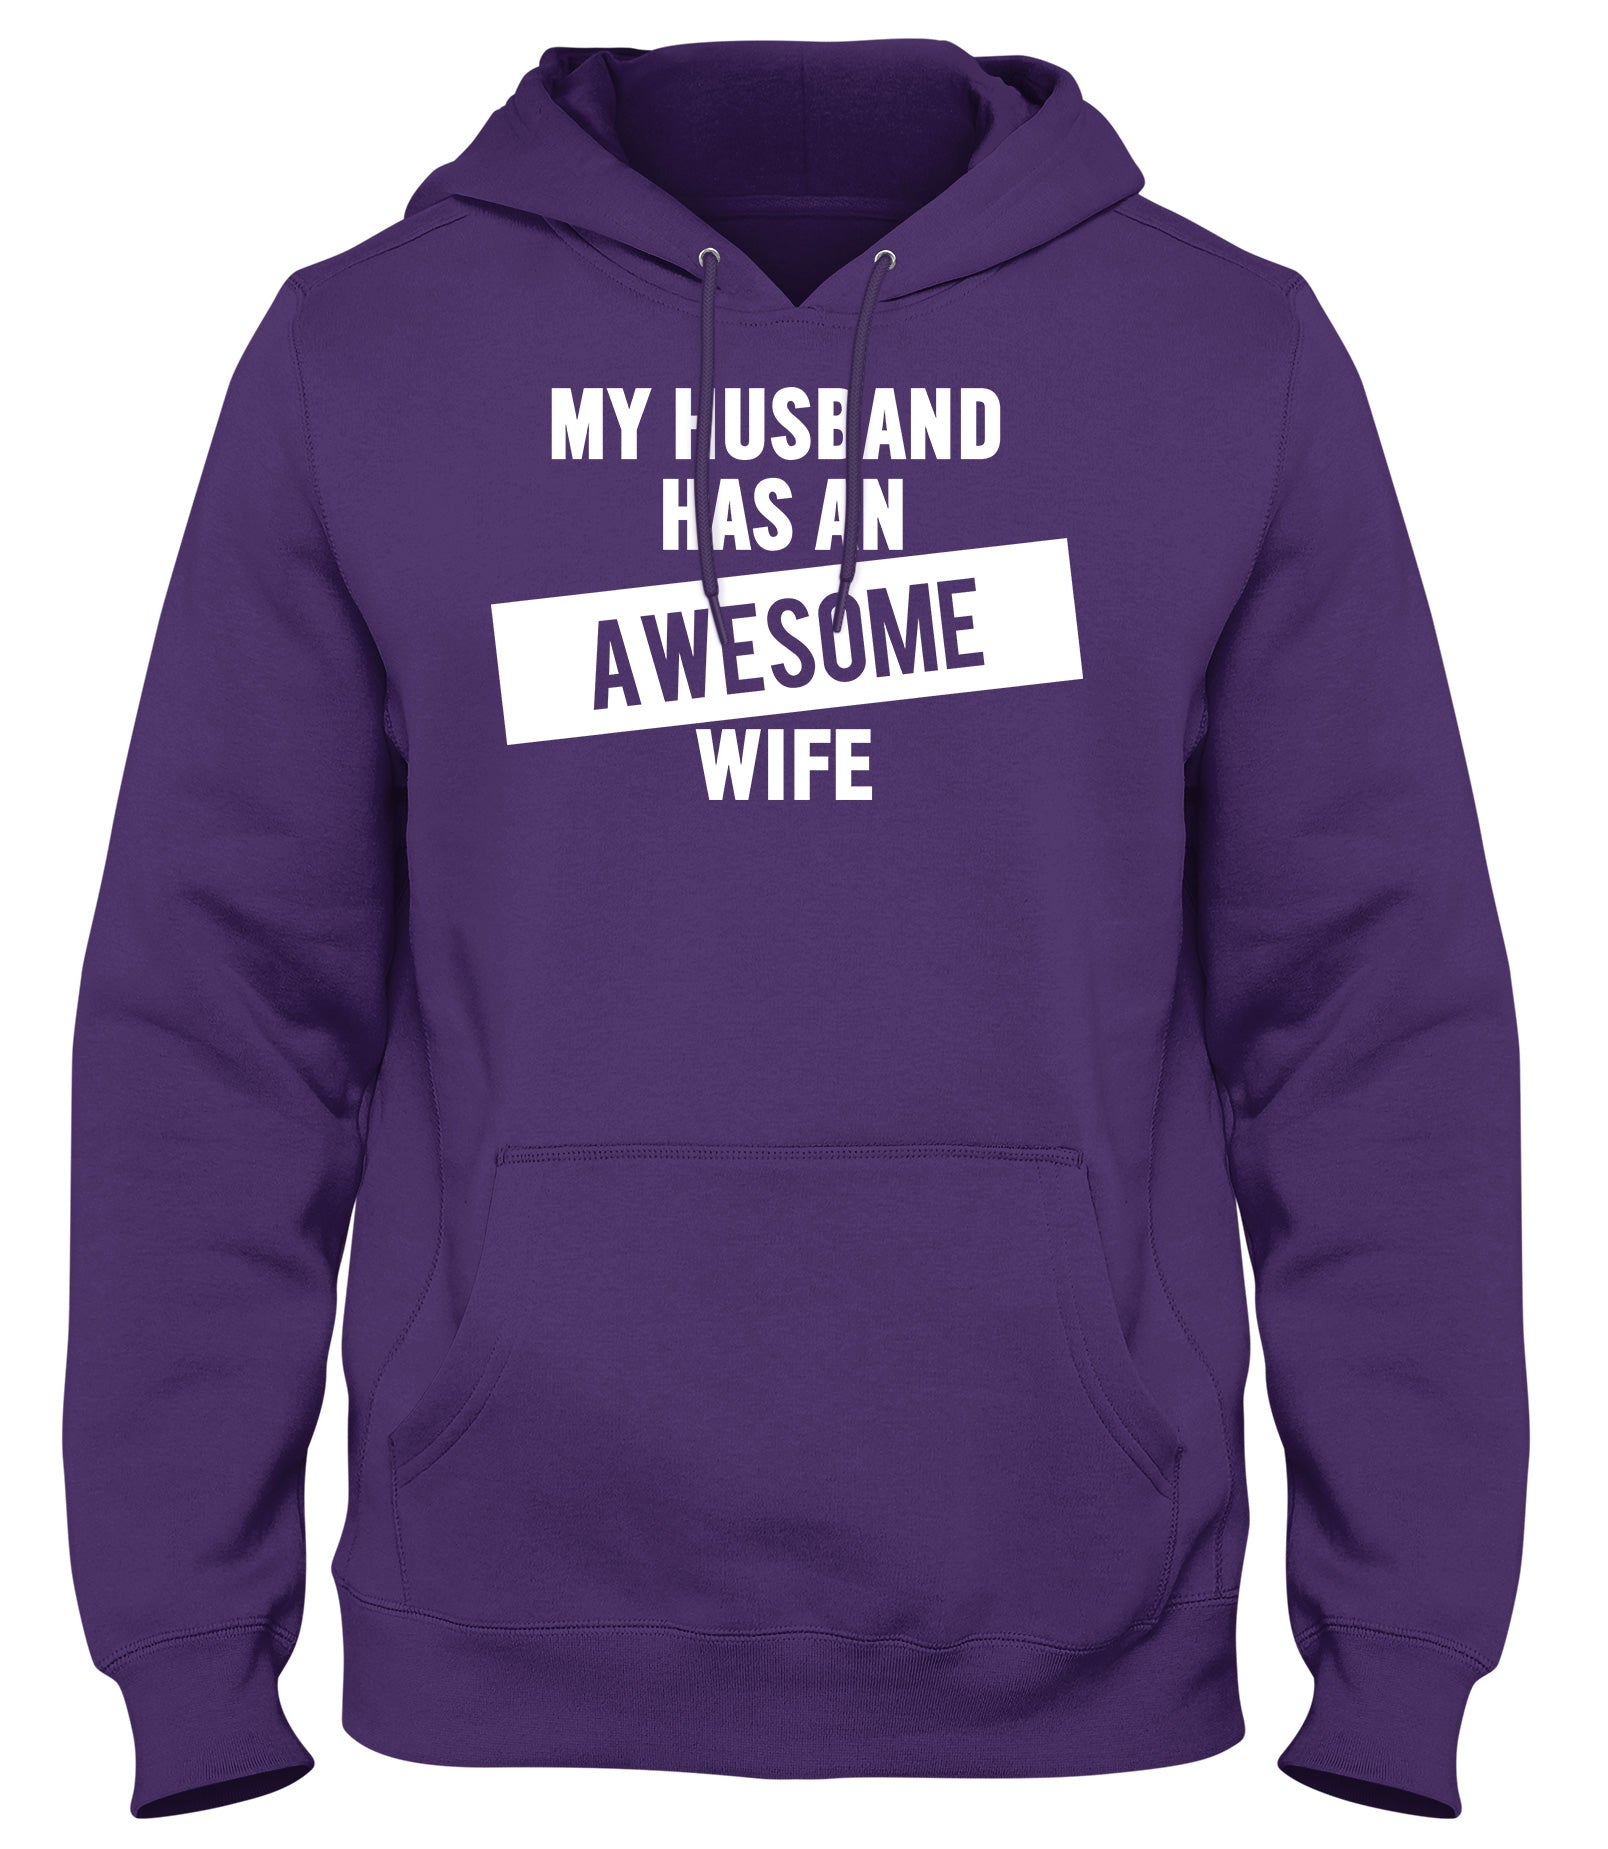 MY HUSBAND HAS AN AWESOME WIFE WOMENS LADIES MENS UNISEX HOODIE